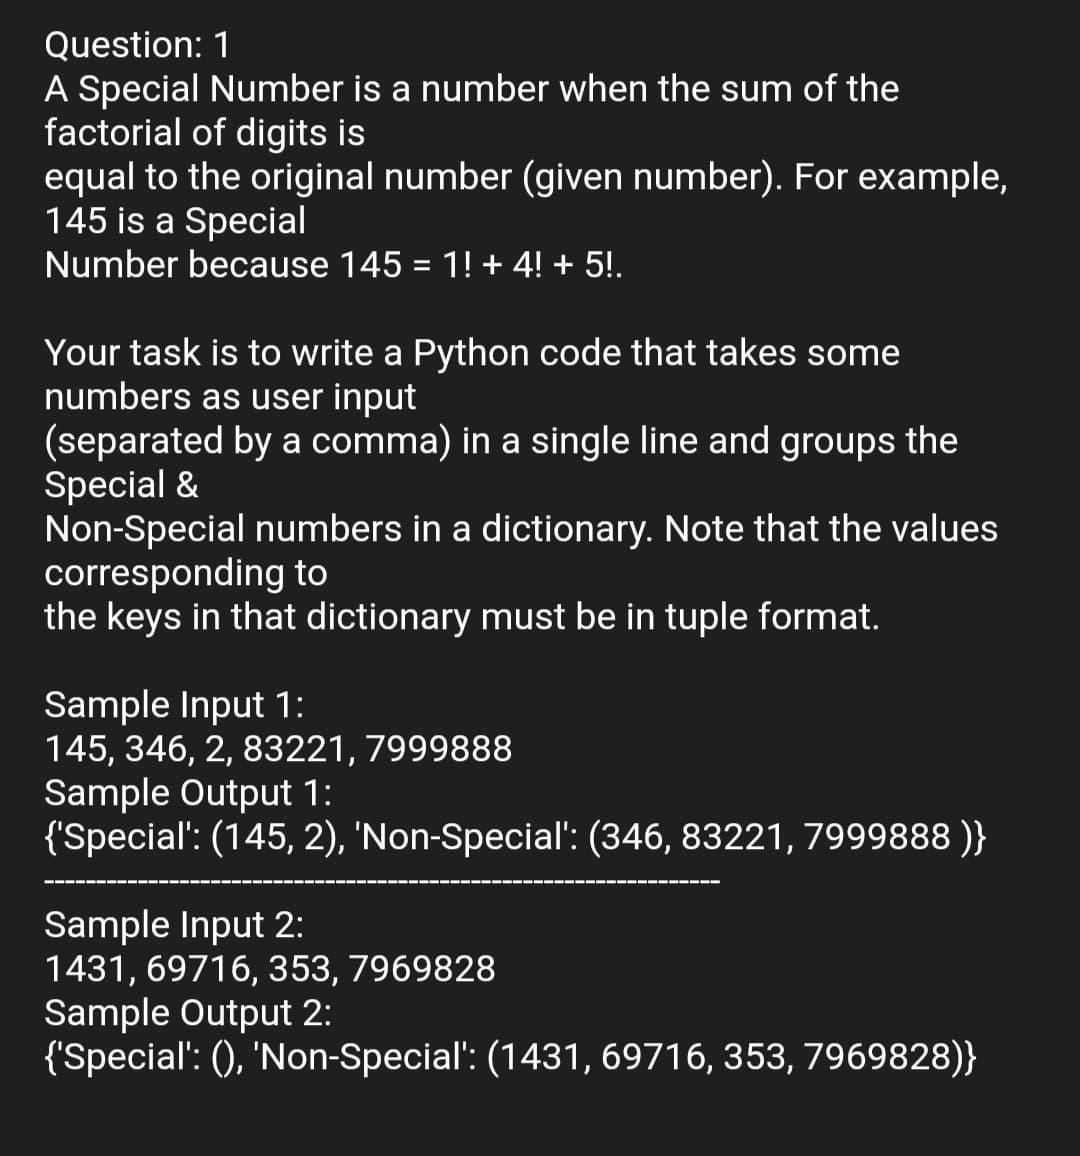 Question: 1
A Special Number is a number when the sum of the
factorial of digits is
equal to the original number (given number). For example,
145 is a Special
Number because 145 = 1! + 4! + 5!.
Your task is to write a Python code that takes some
numbers as user input
(separated by a comma) in a single line and groups the
Special &
Non-Special numbers in a dictionary. Note that the values
corresponding to
the keys in that dictionary must be in tuple format.
Sample Input 1:
145, 346, 2, 83221, 7999888
Sample Output 1:
{'Special': (145, 2), 'Non-Special: (346, 83221, 7999888 )}
Sample Input 2:
1431, 69716, 353, 7969828
Sample Output 2:
{'Special': (), 'Non-Special': (1431, 69716, 353, 7969828)}
